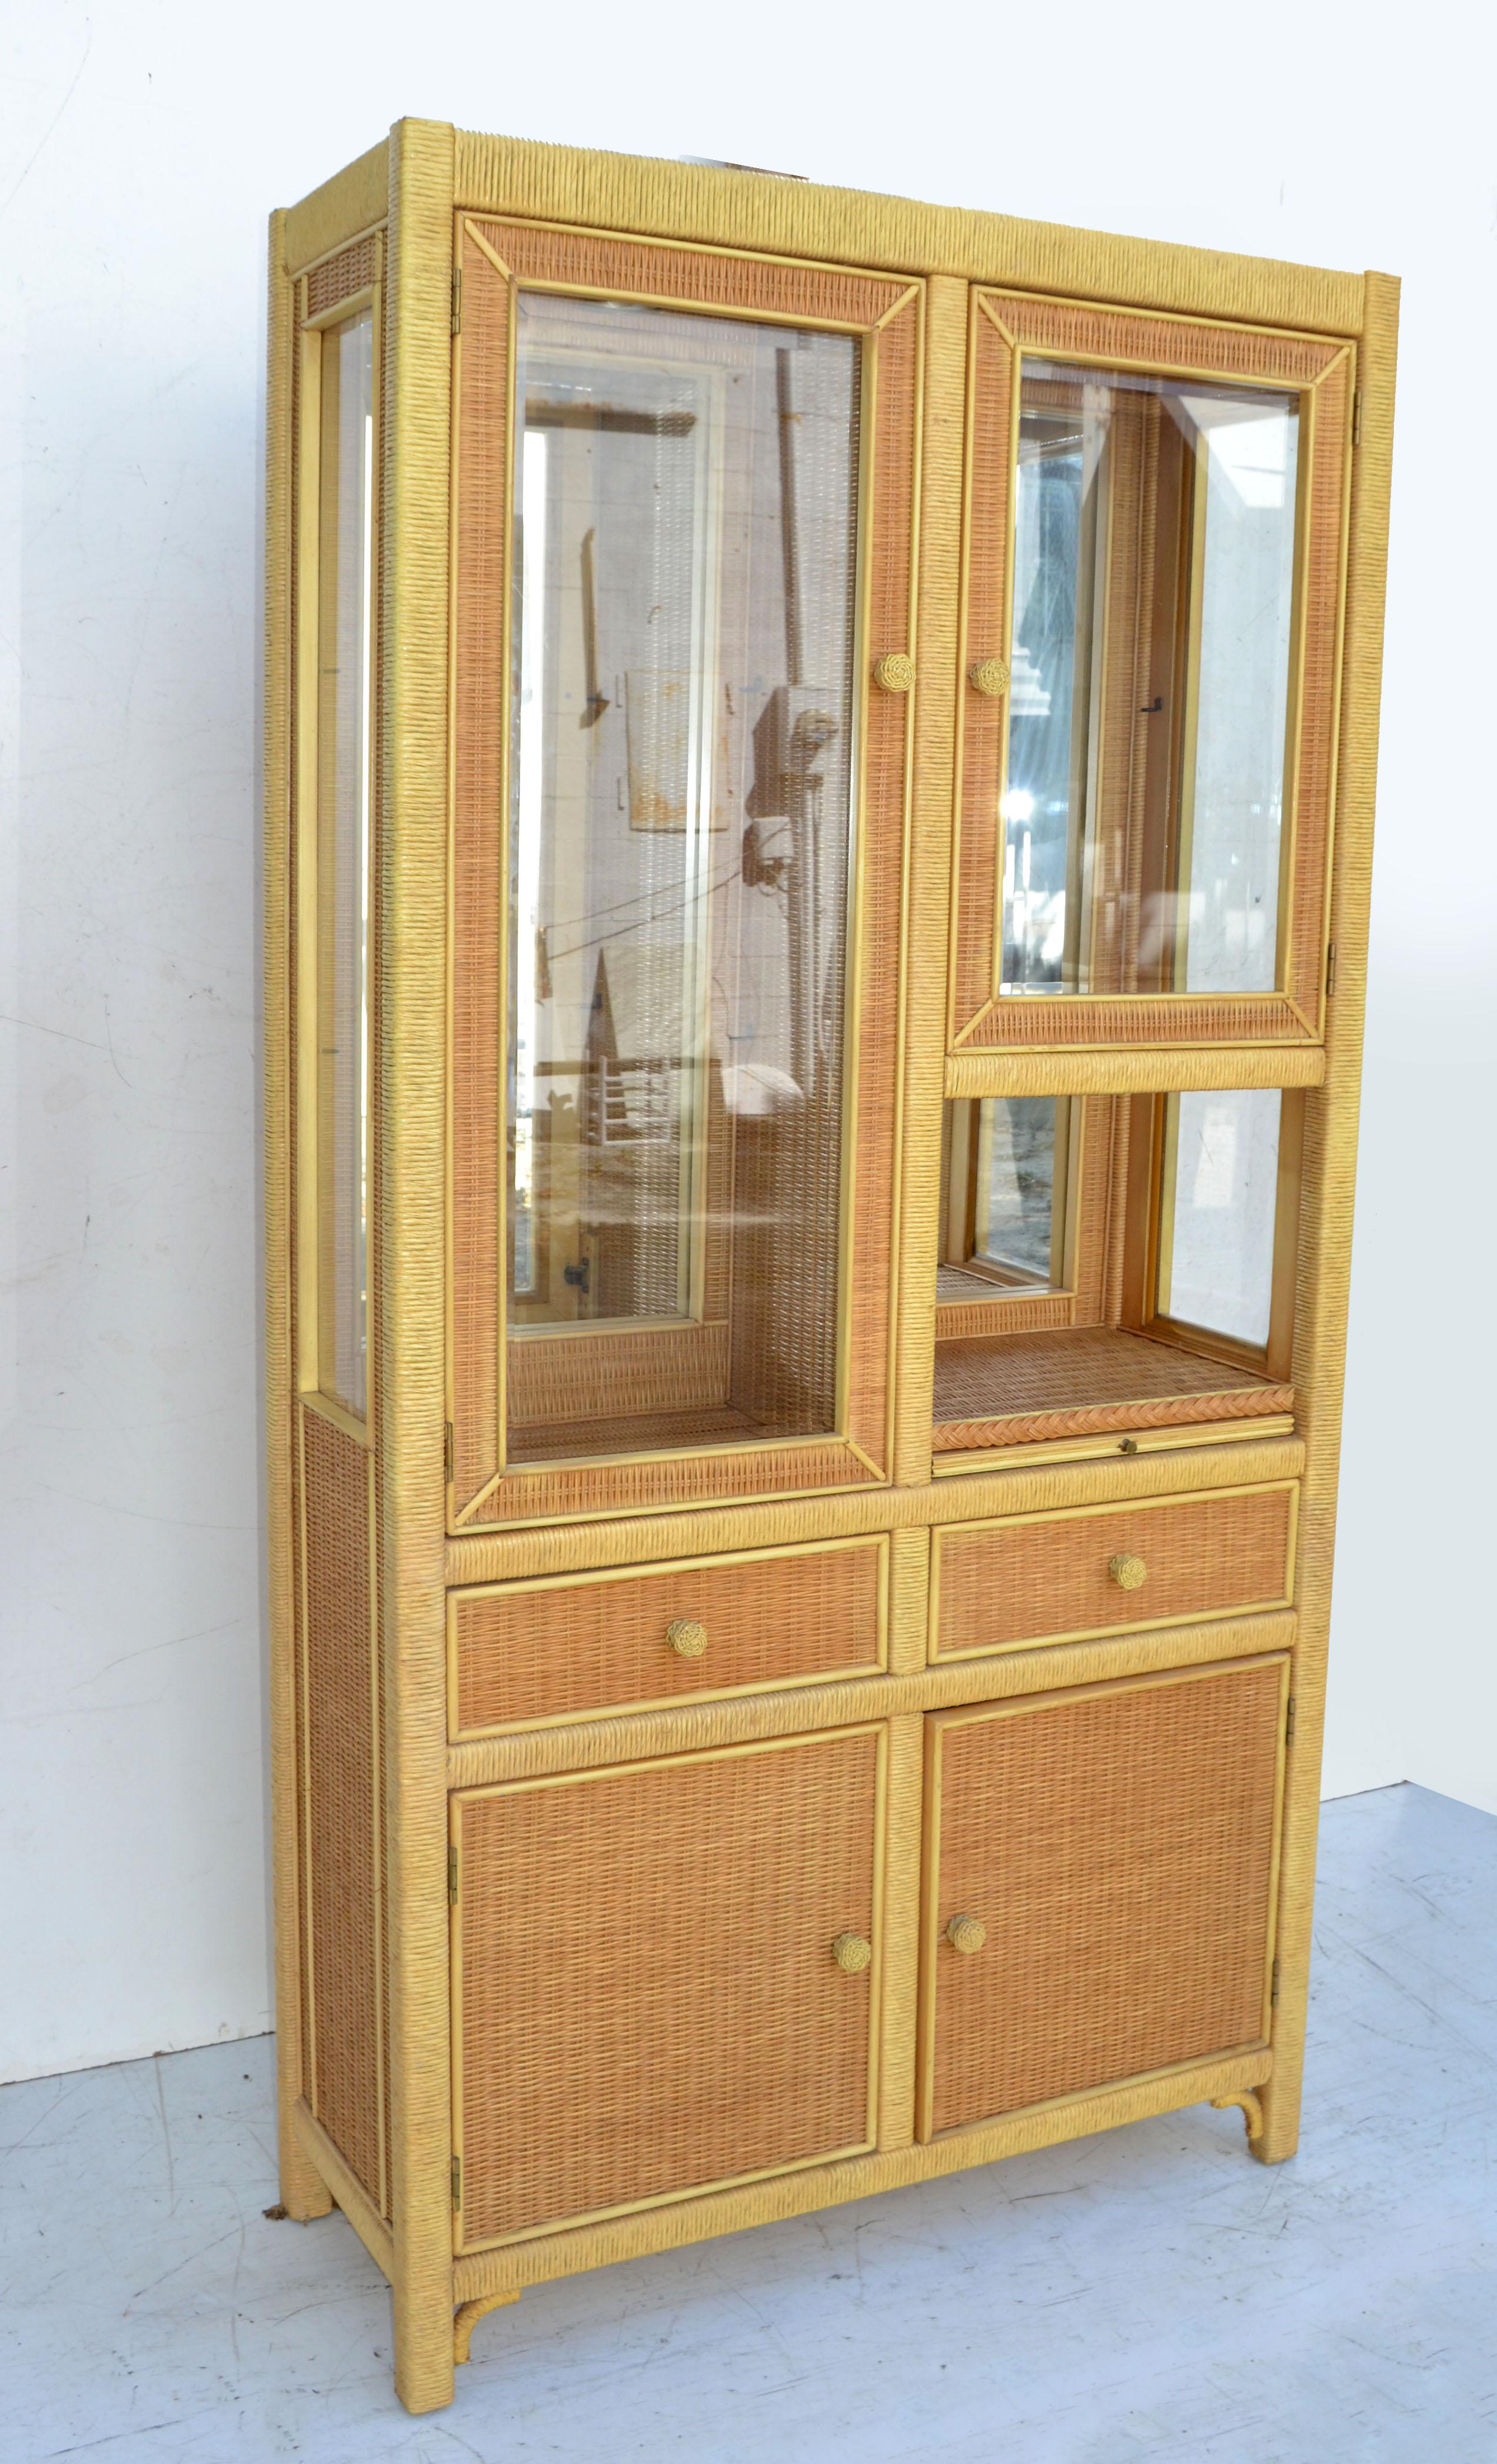 American Mid-Century Modern Wicker by Henry Link handcrafted China Cabinet or Cupboard made out of Bentwood Wicker, hand woven cane, 4 Glass shelves and mirror Back wall. 
Featuring at the Base 2 doors with 2 shelves, 2 drawers, one with Silverware